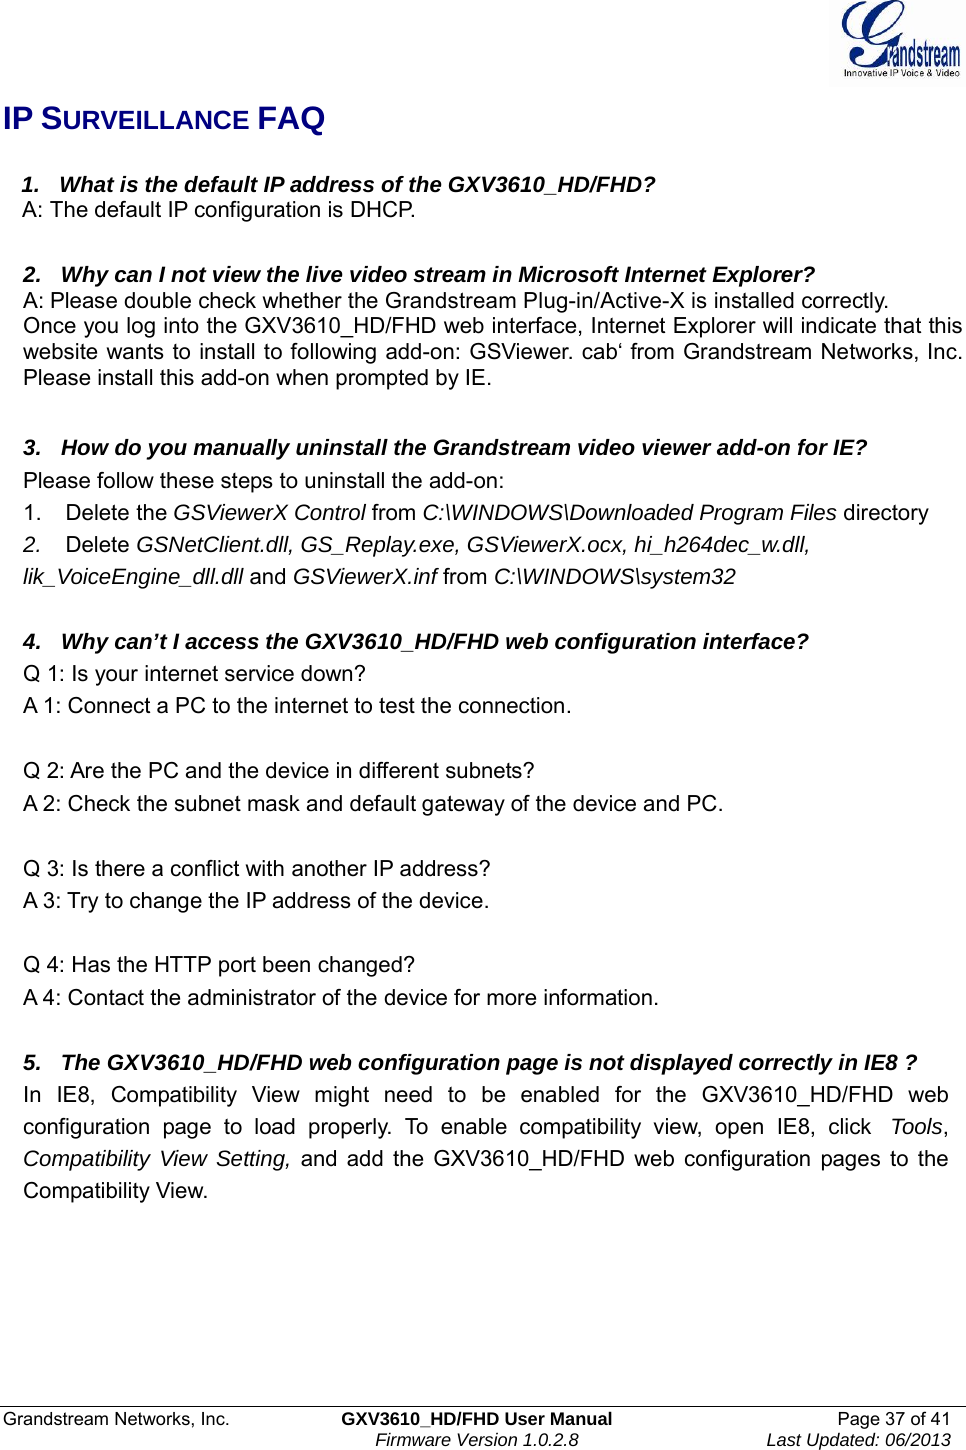  Grandstream Networks, Inc.  GXV3610_HD/FHD User Manual  Page 37 of 41    Firmware Version 1.0.2.8  Last Updated: 06/2013  IP SURVEILLANCE FAQ     1.   What is the default IP address of the GXV3610_HD/FHD?    A: The default IP configuration is DHCP.   2.   Why can I not view the live video stream in Microsoft Internet Explorer? A: Please double check whether the Grandstream Plug-in/Active-X is installed correctly. Once you log into the GXV3610_HD/FHD web interface, Internet Explorer will indicate that this website wants to install to following add-on: GSViewer. cab‘ from Grandstream Networks, Inc. Please install this add-on when prompted by IE.   3.   How do you manually uninstall the Grandstream video viewer add-on for IE? Please follow these steps to uninstall the add-on: 1.    Delete the GSViewerX Control from C:\WINDOWS\Downloaded Program Files directory 2.    Delete GSNetClient.dll, GS_Replay.exe, GSViewerX.ocx, hi_h264dec_w.dll, lik_VoiceEngine_dll.dll and GSViewerX.inf from C:\WINDOWS\system32   4.   Why can’t I access the GXV3610_HD/FHD web configuration interface? Q 1: Is your internet service down? A 1: Connect a PC to the internet to test the connection.   Q 2: Are the PC and the device in different subnets? A 2: Check the subnet mask and default gateway of the device and PC.   Q 3: Is there a conflict with another IP address? A 3: Try to change the IP address of the device.   Q 4: Has the HTTP port been changed? A 4: Contact the administrator of the device for more information.   5.   The GXV3610_HD/FHD web configuration page is not displayed correctly in IE8 ? In IE8, Compatibility View might need to be enabled for the GXV3610_HD/FHD web configuration page to load properly. To enable compatibility view, open IE8, click  Tools, Compatibility View Setting, and add the GXV3610_HD/FHD web configuration pages to the Compatibility View.   